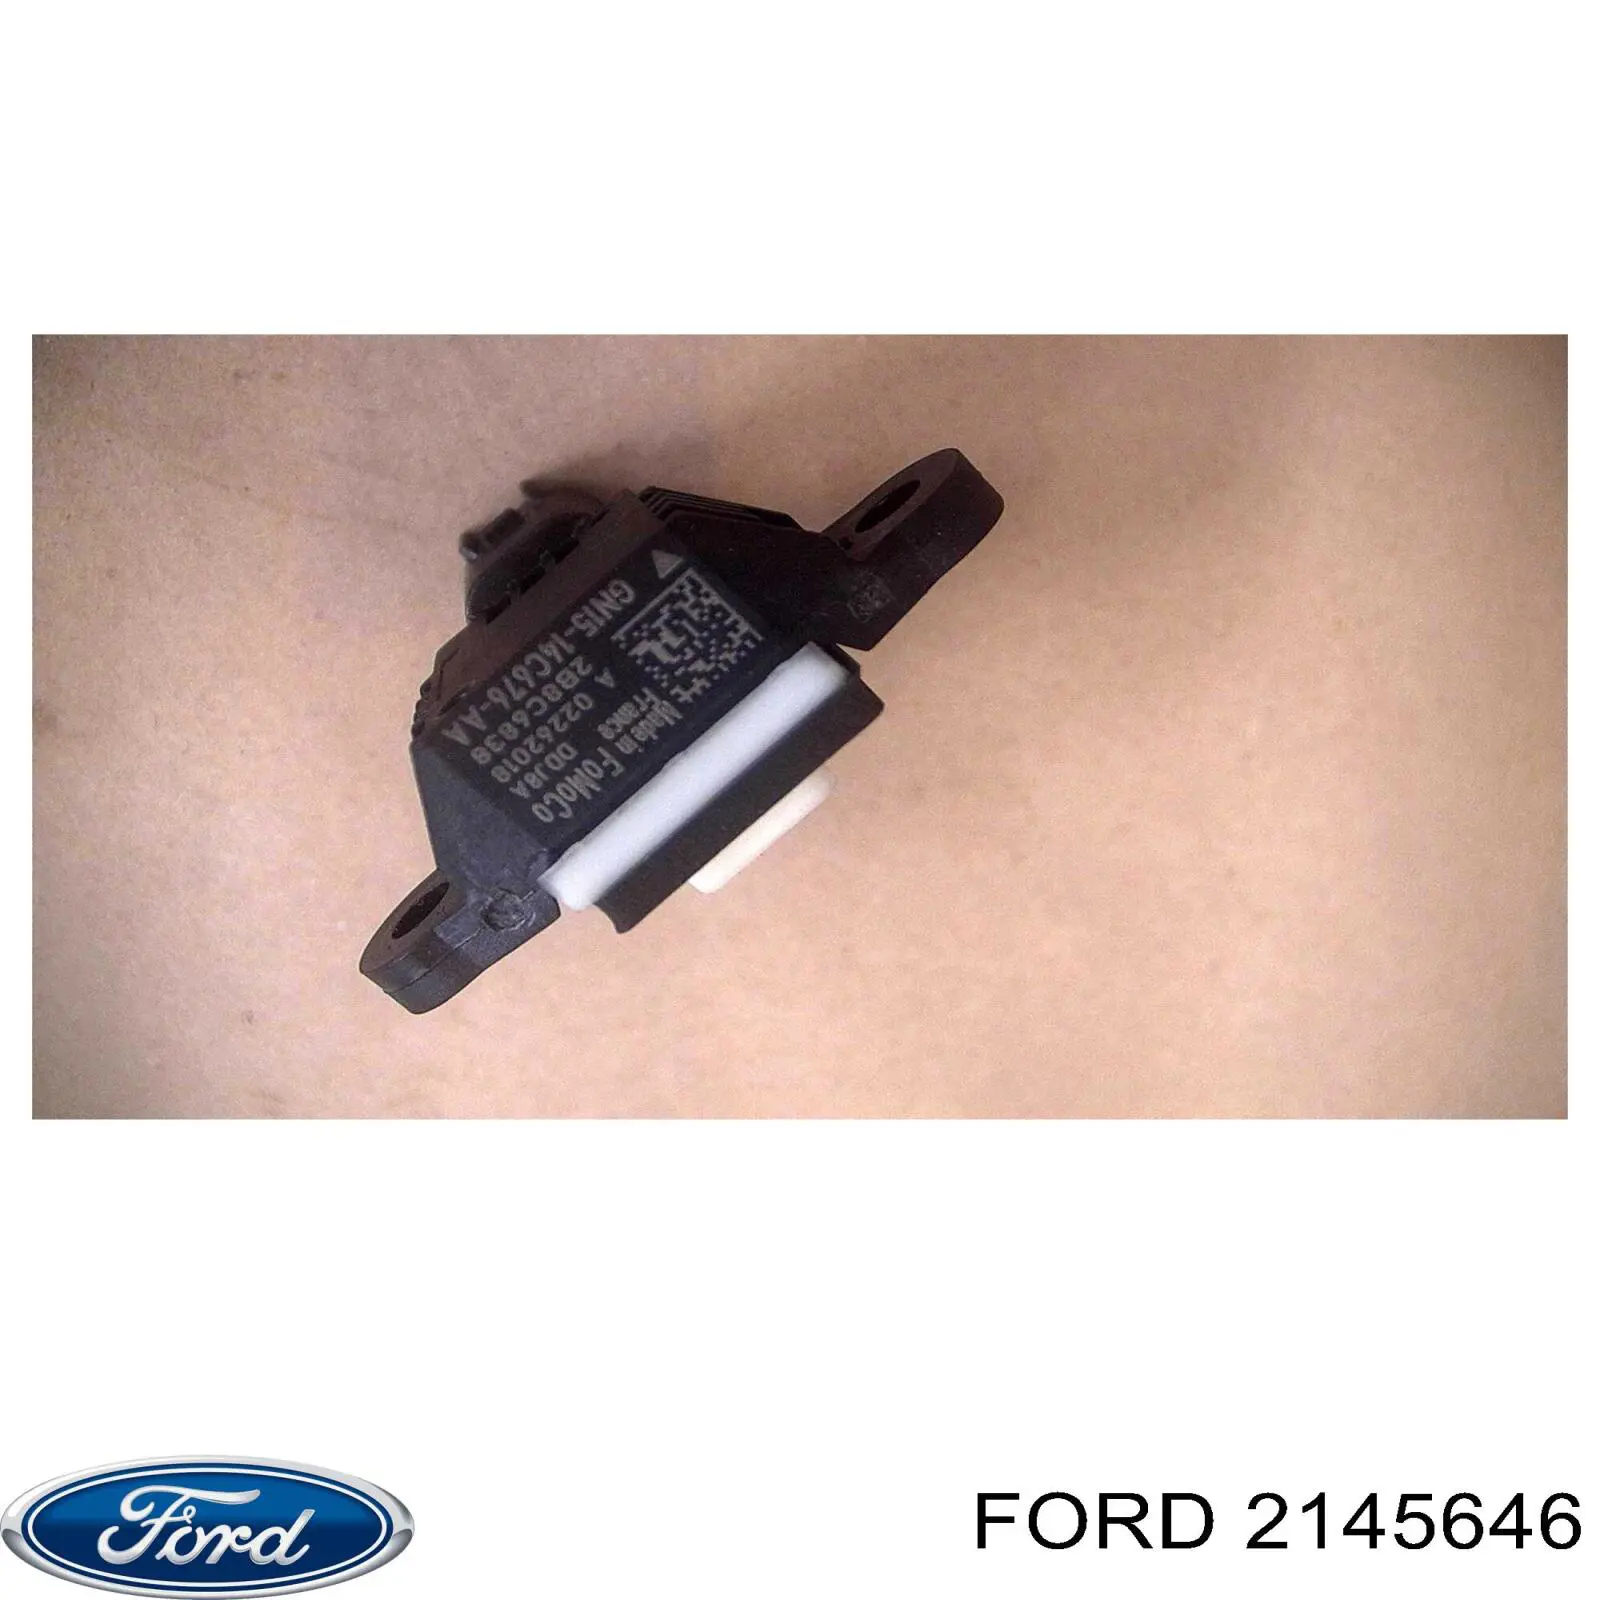 2145646 Ford sensor airbag lateral derecho